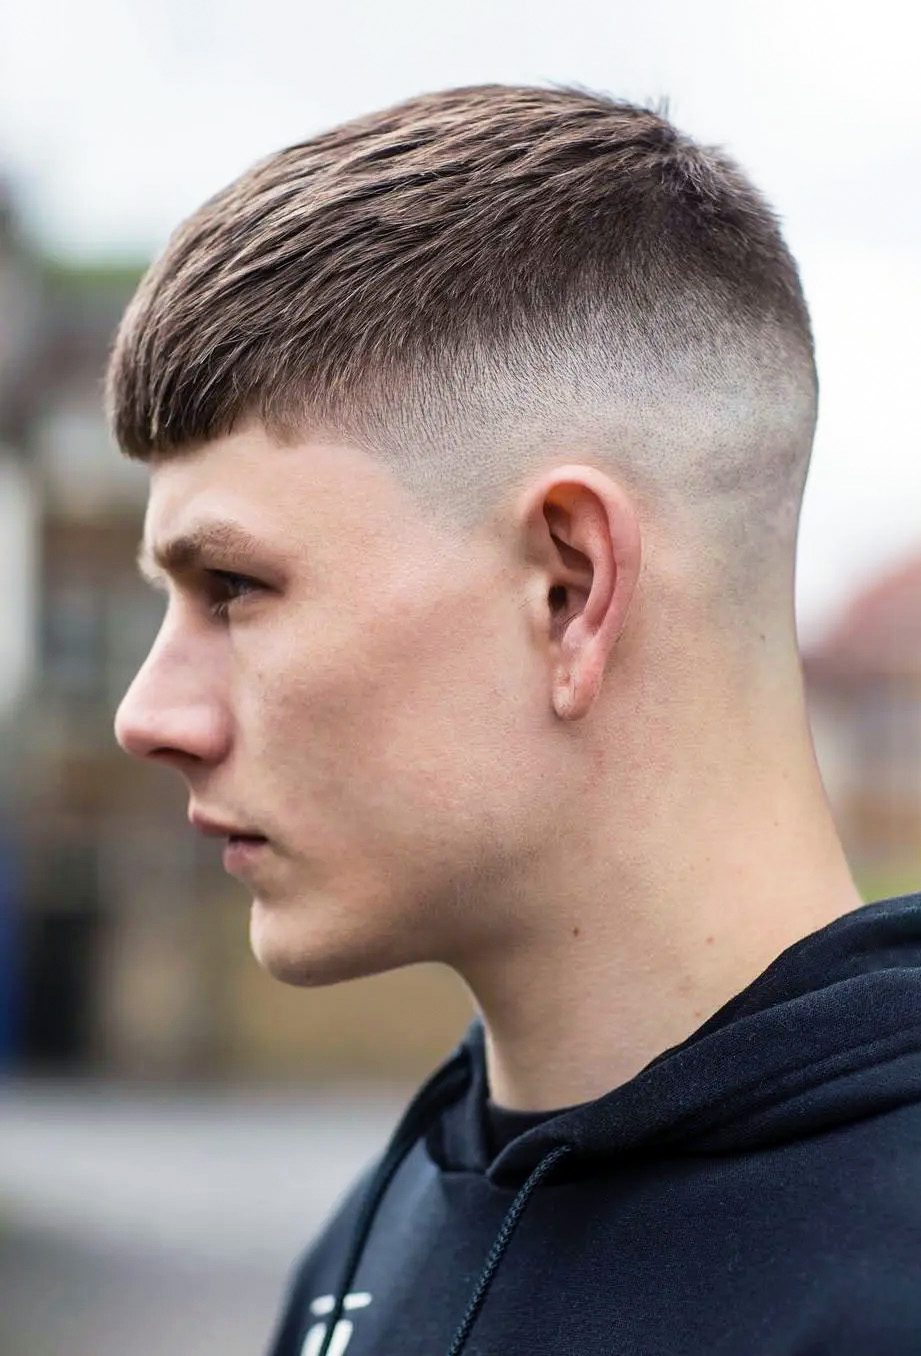 40 Crew Cut Examples: A Great Choice for Modern Men | Haircut Inspiration